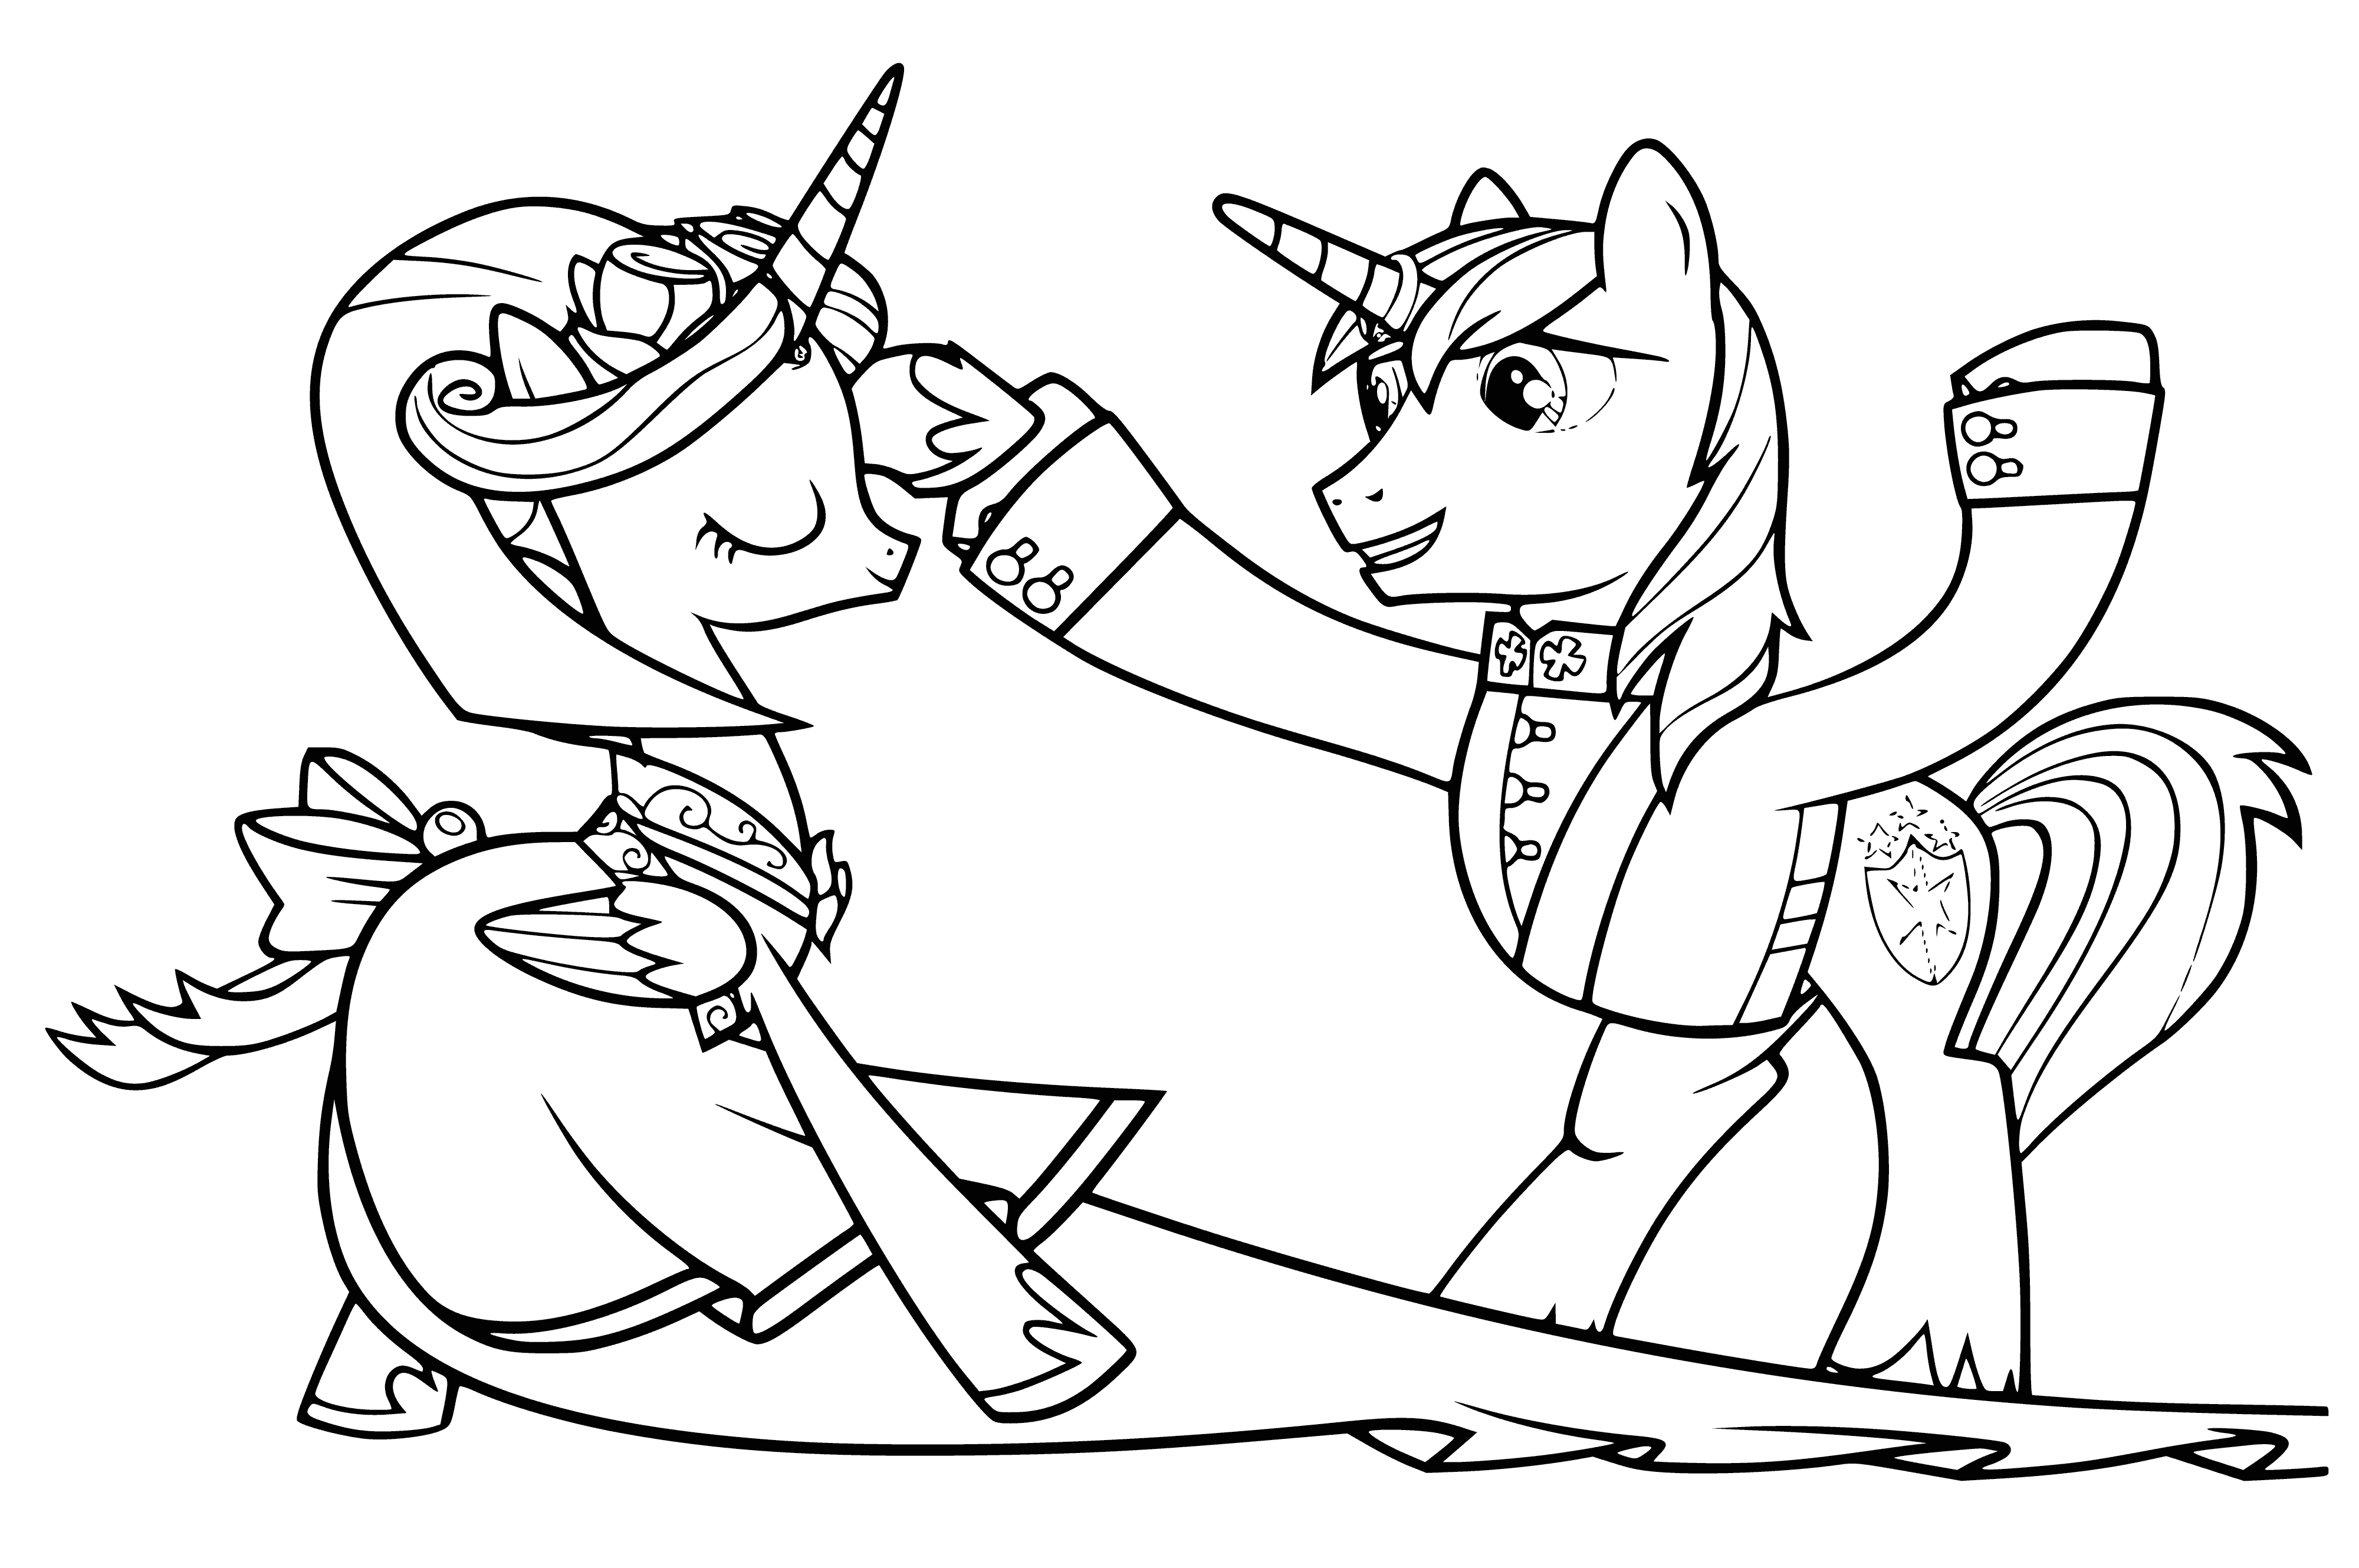 coloring page: A sweet scene: Princess Cadence & Shining Armor in stunning garb, lovingly looking into each other's eyes.